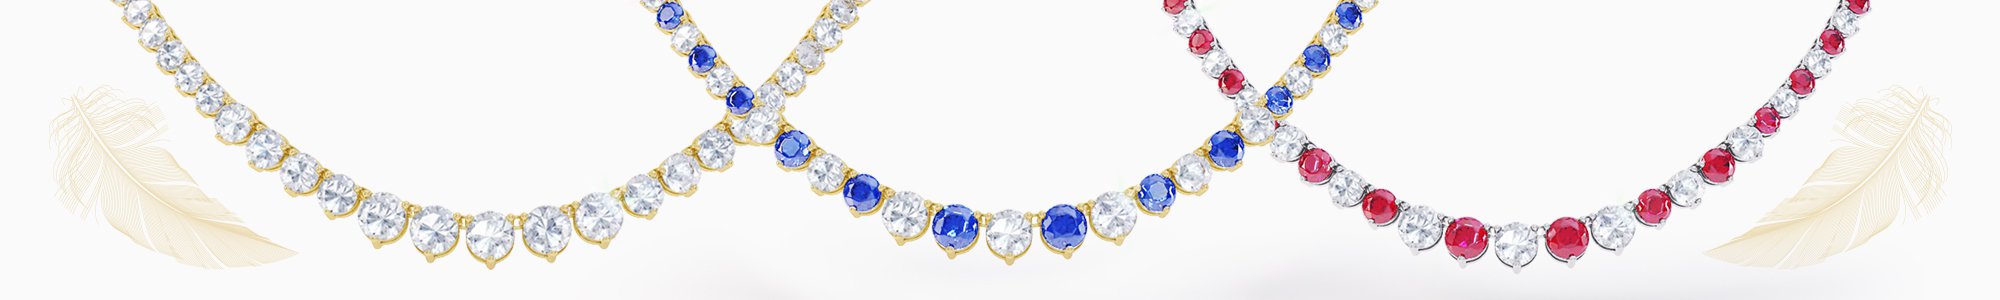 Stardust Collection - All Sapphire Jewellery